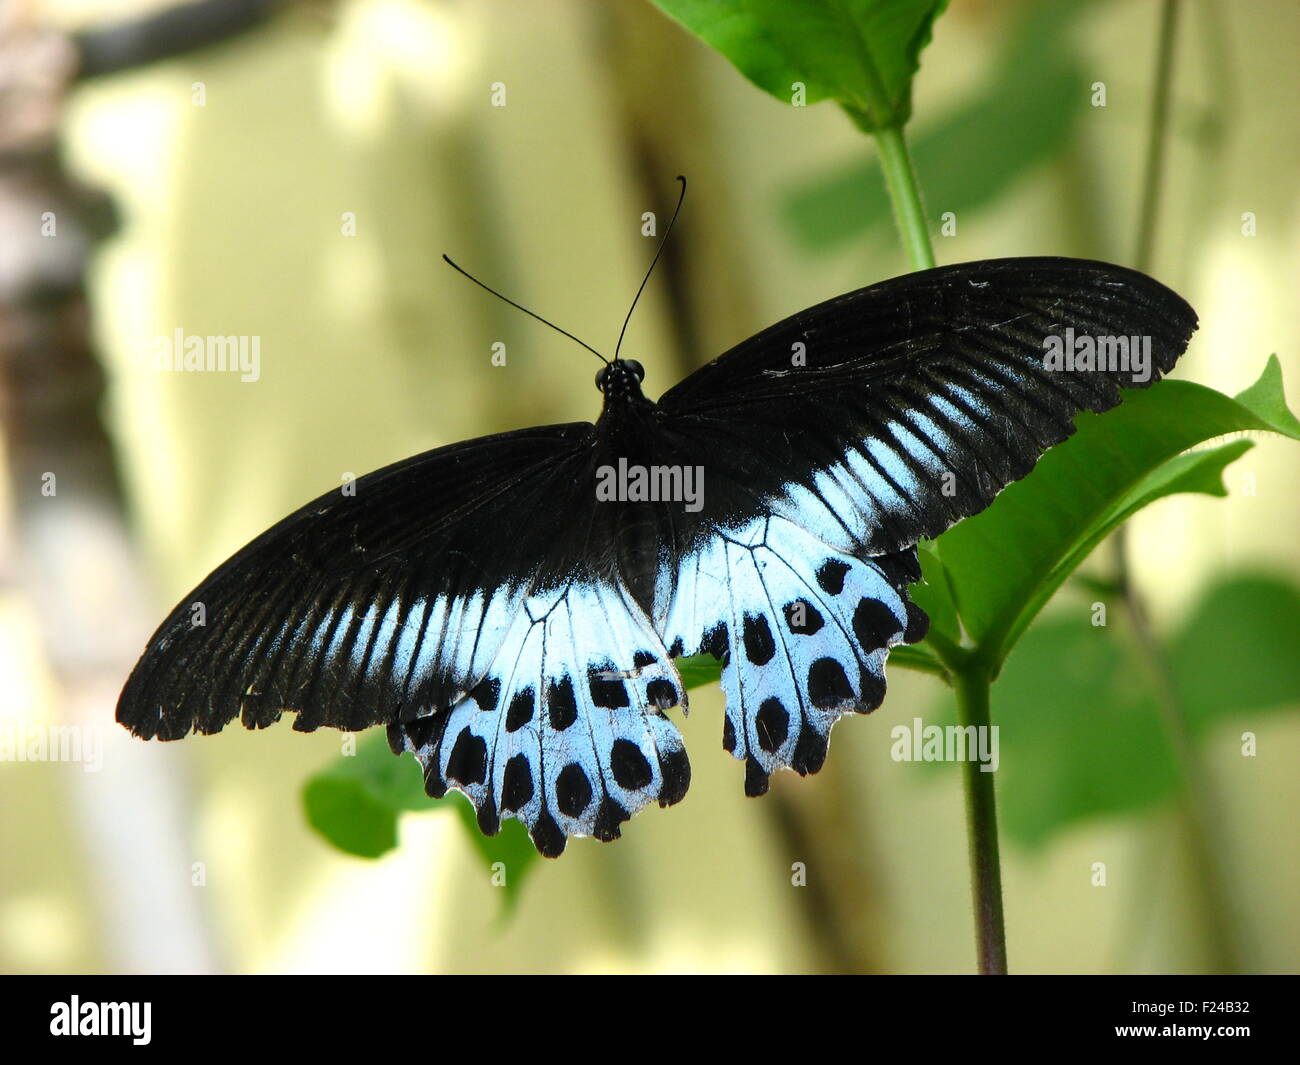 A beautiful butterfly species from Indian tropics with spread-out ...